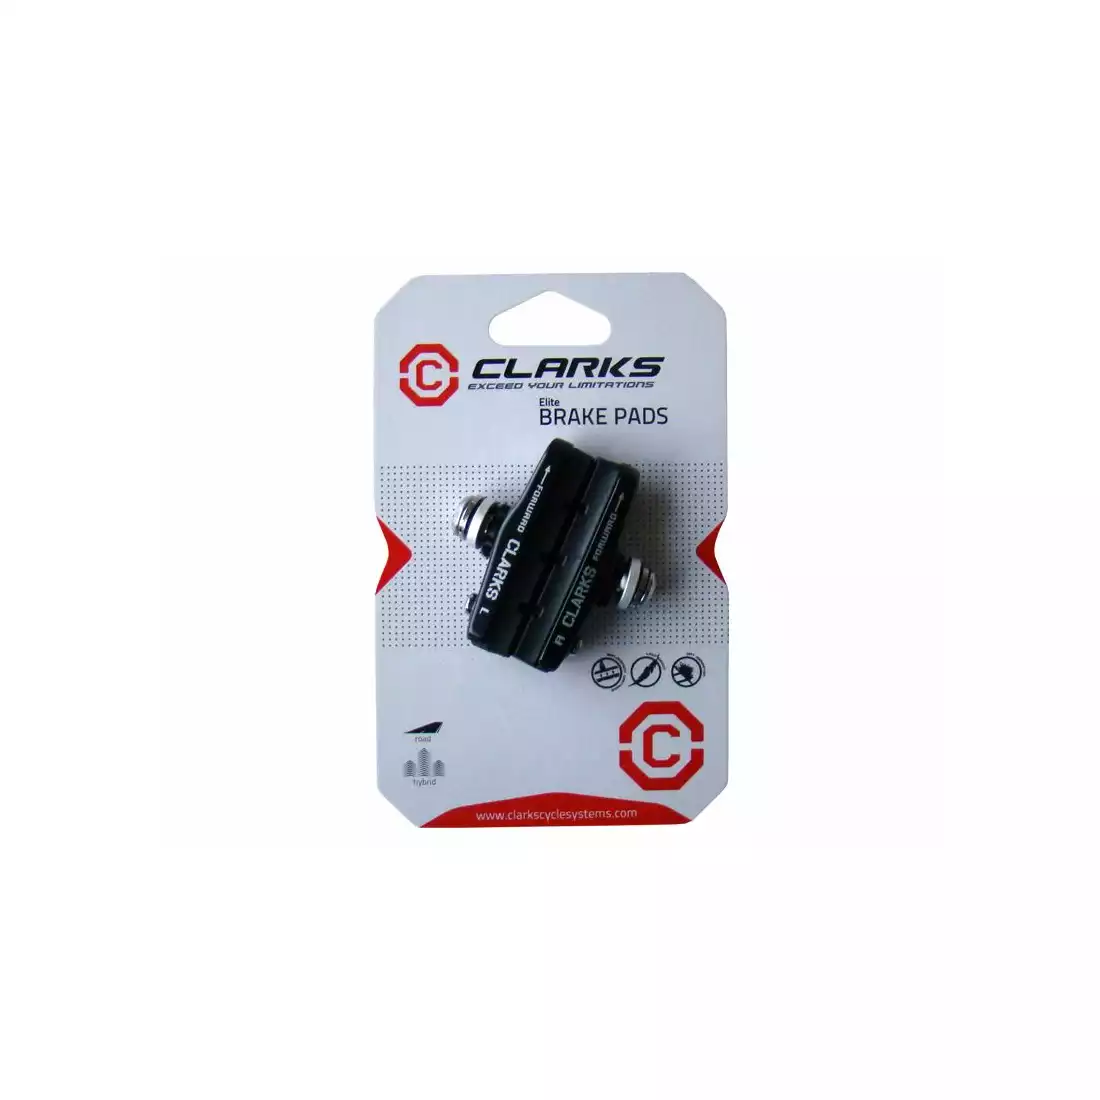 CLARKS CPS459 Road brake pads Campagnolo/Shimano 105SC, Ultegra, Dura-Ace